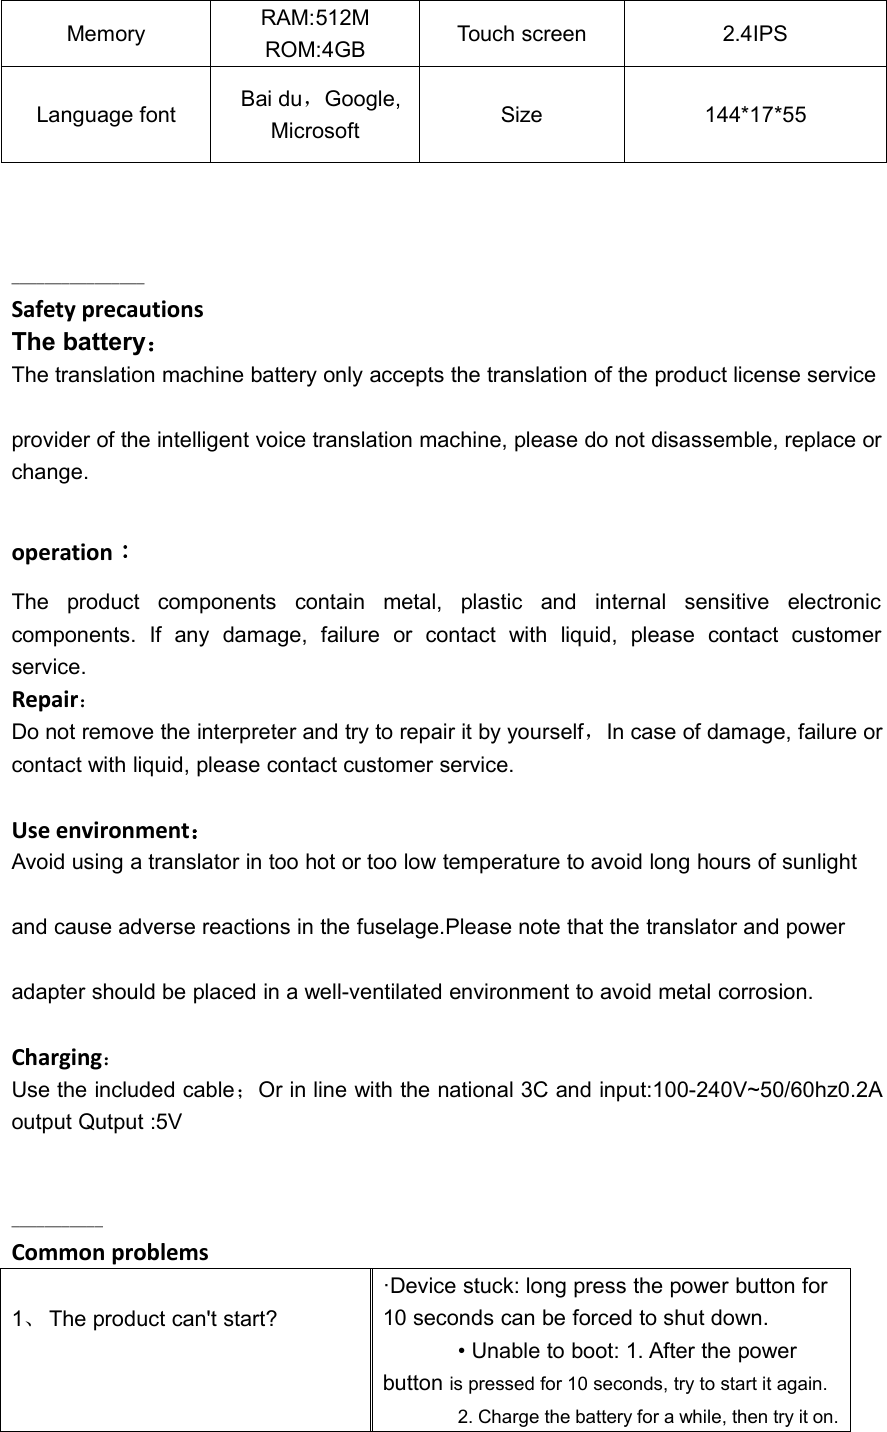 Page 5 of Beibo Intelligent Technology T2S Smart voice translator User Manual Users manual